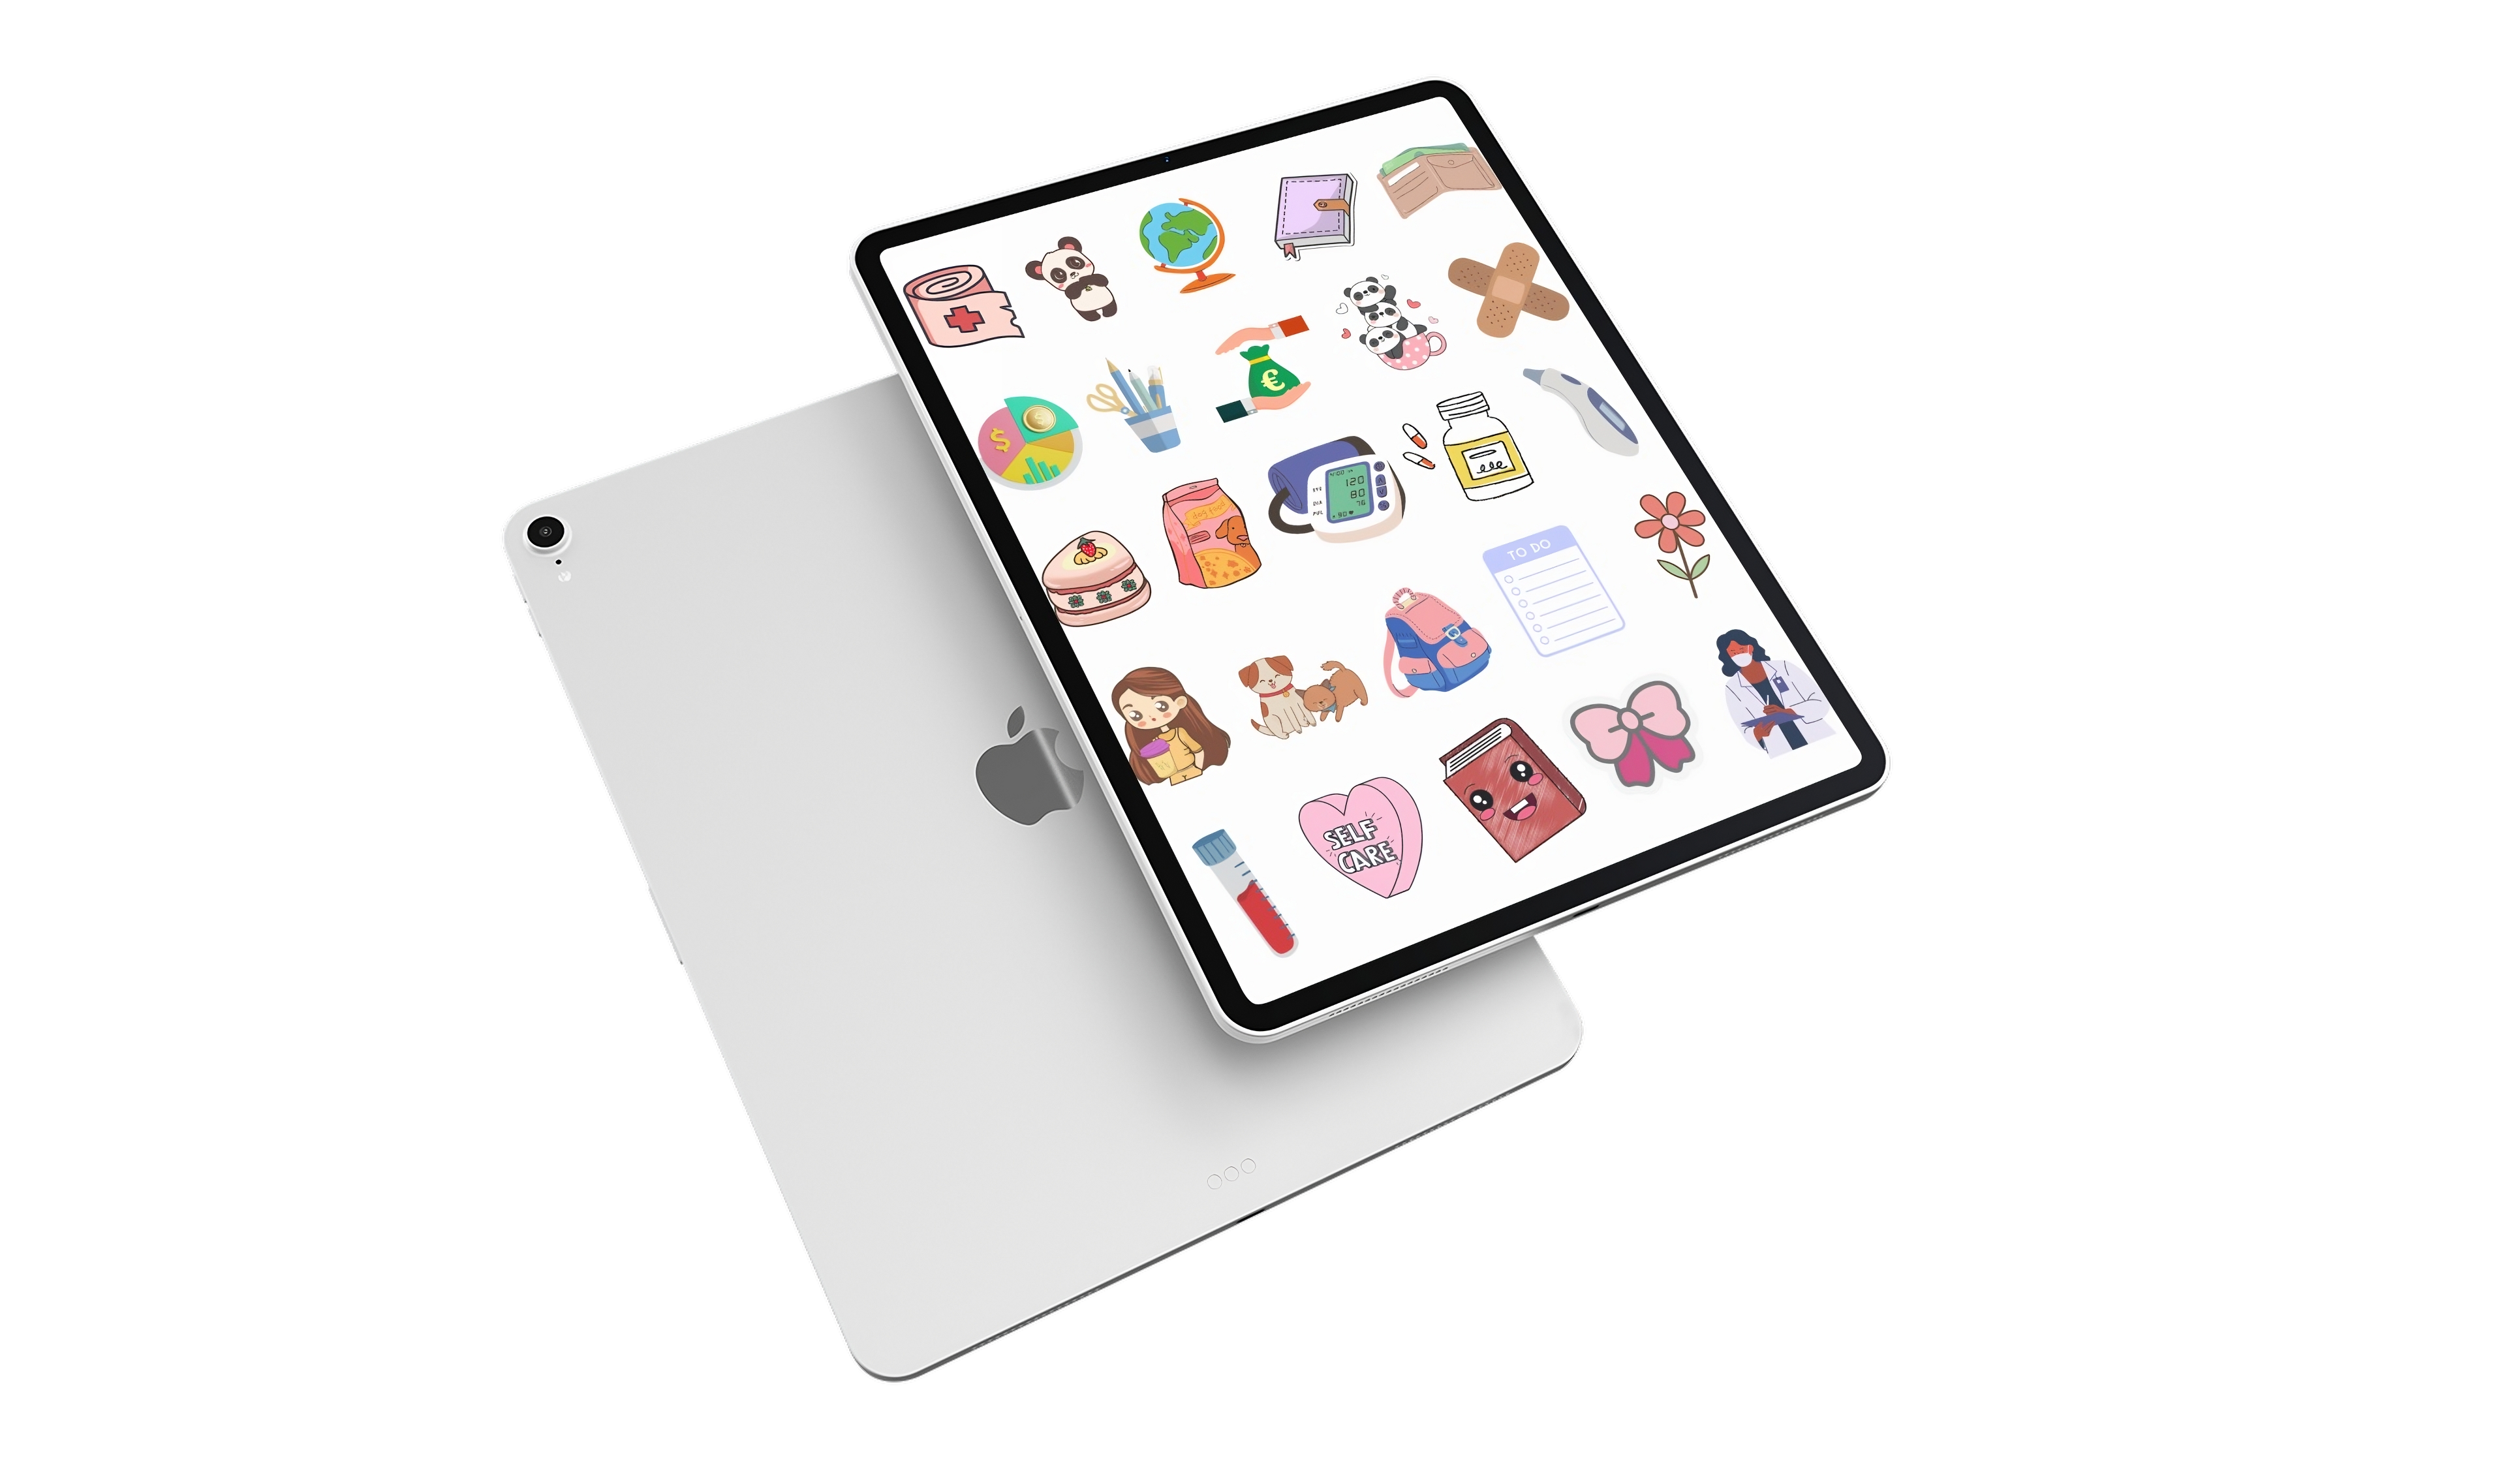 render-mockup-of-an-ipad-pro-floating-against-another-ipad-24463-transformed.png__PID:37d5ae31-d66d-4e1f-9f67-d2dfeae4bcc8